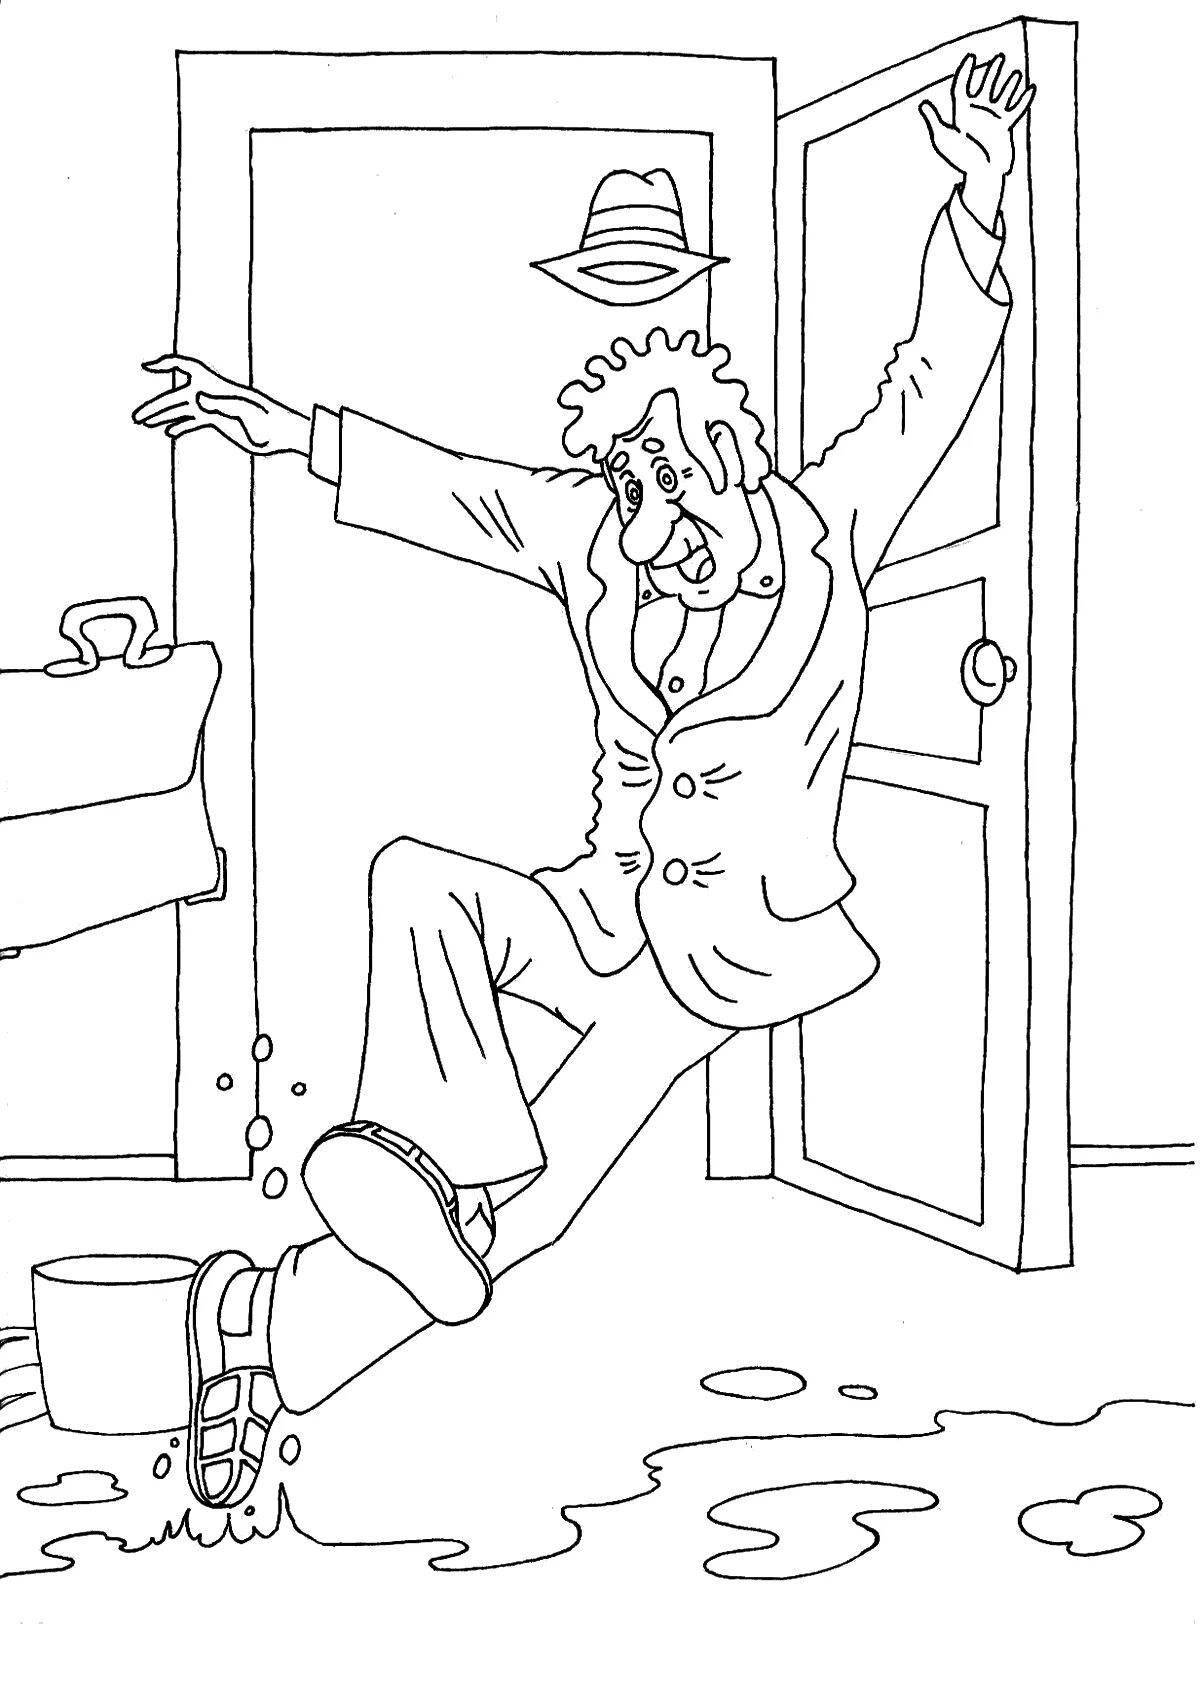 Coloring page of wasted time - mournful